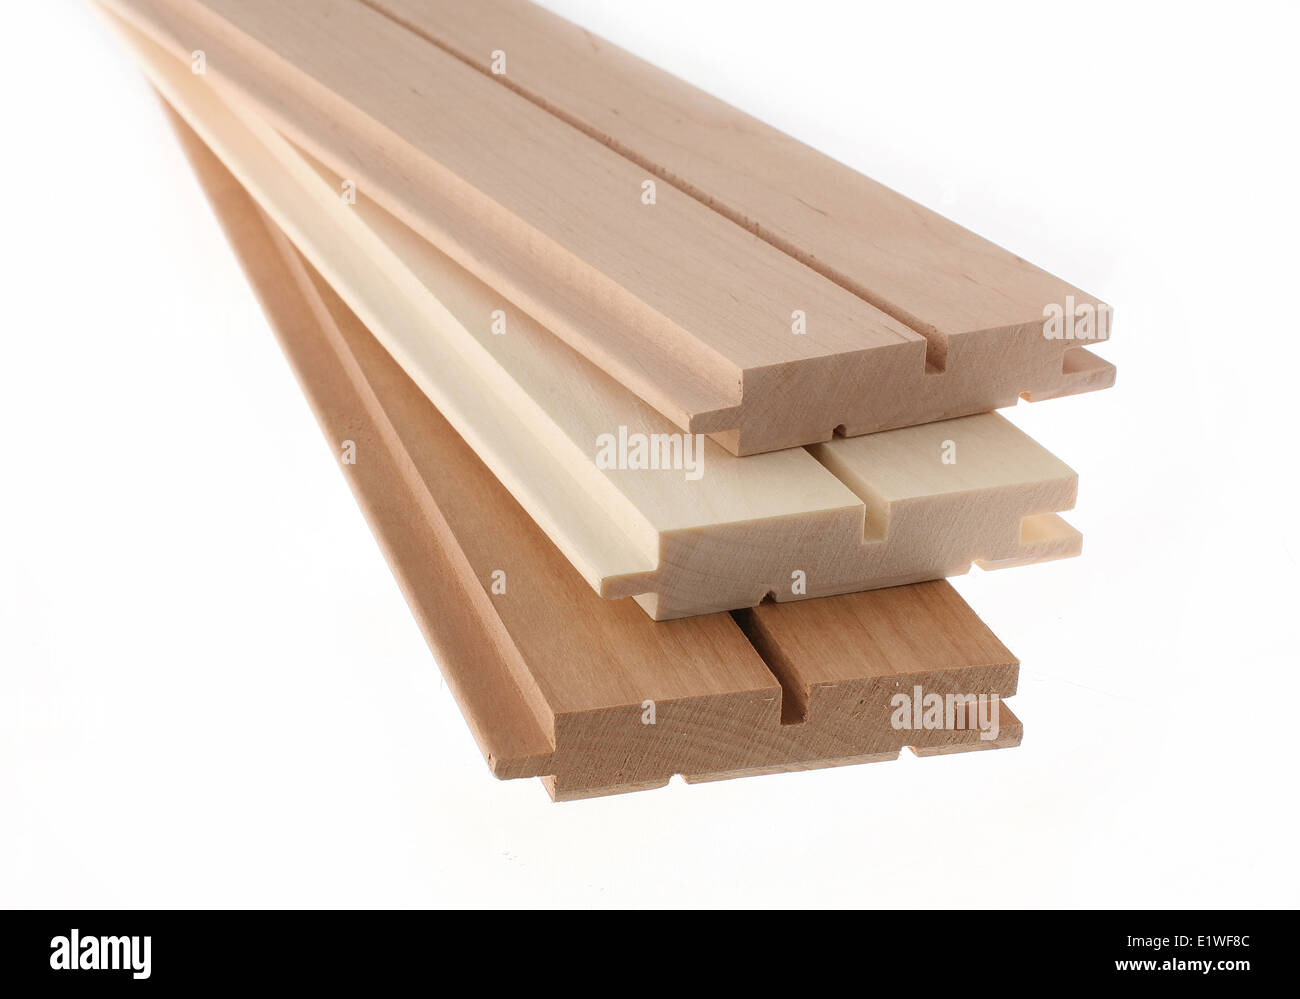 Clean freshly cut wooden plank Stock Photo